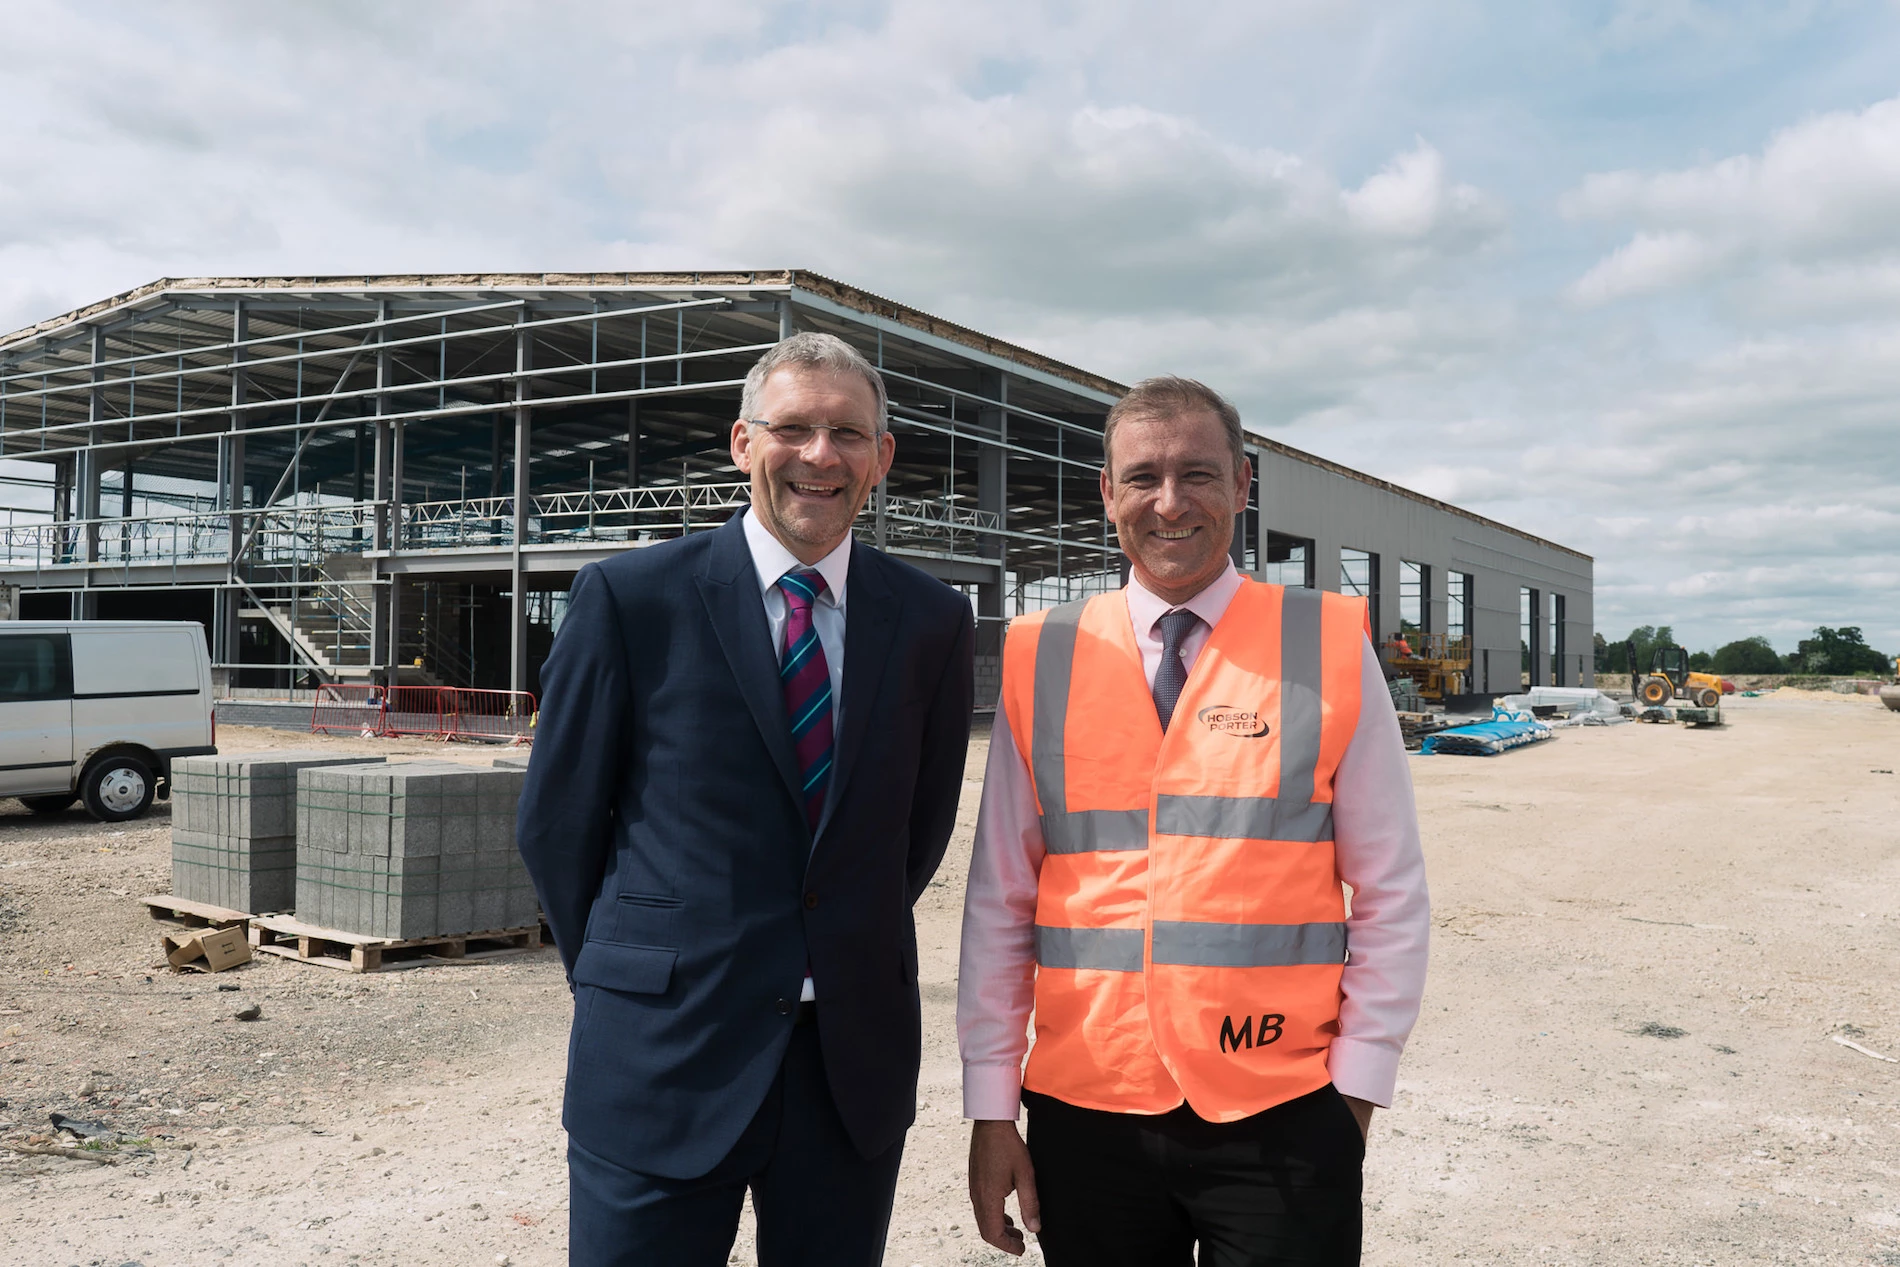 Ian Hodges, Managing Director of the Horncastle Group PLC and Mike Beal, Construction Director at Hobson and Porter, outside DHL’s new office and warehouse development on Ozone Business Park, Howden.